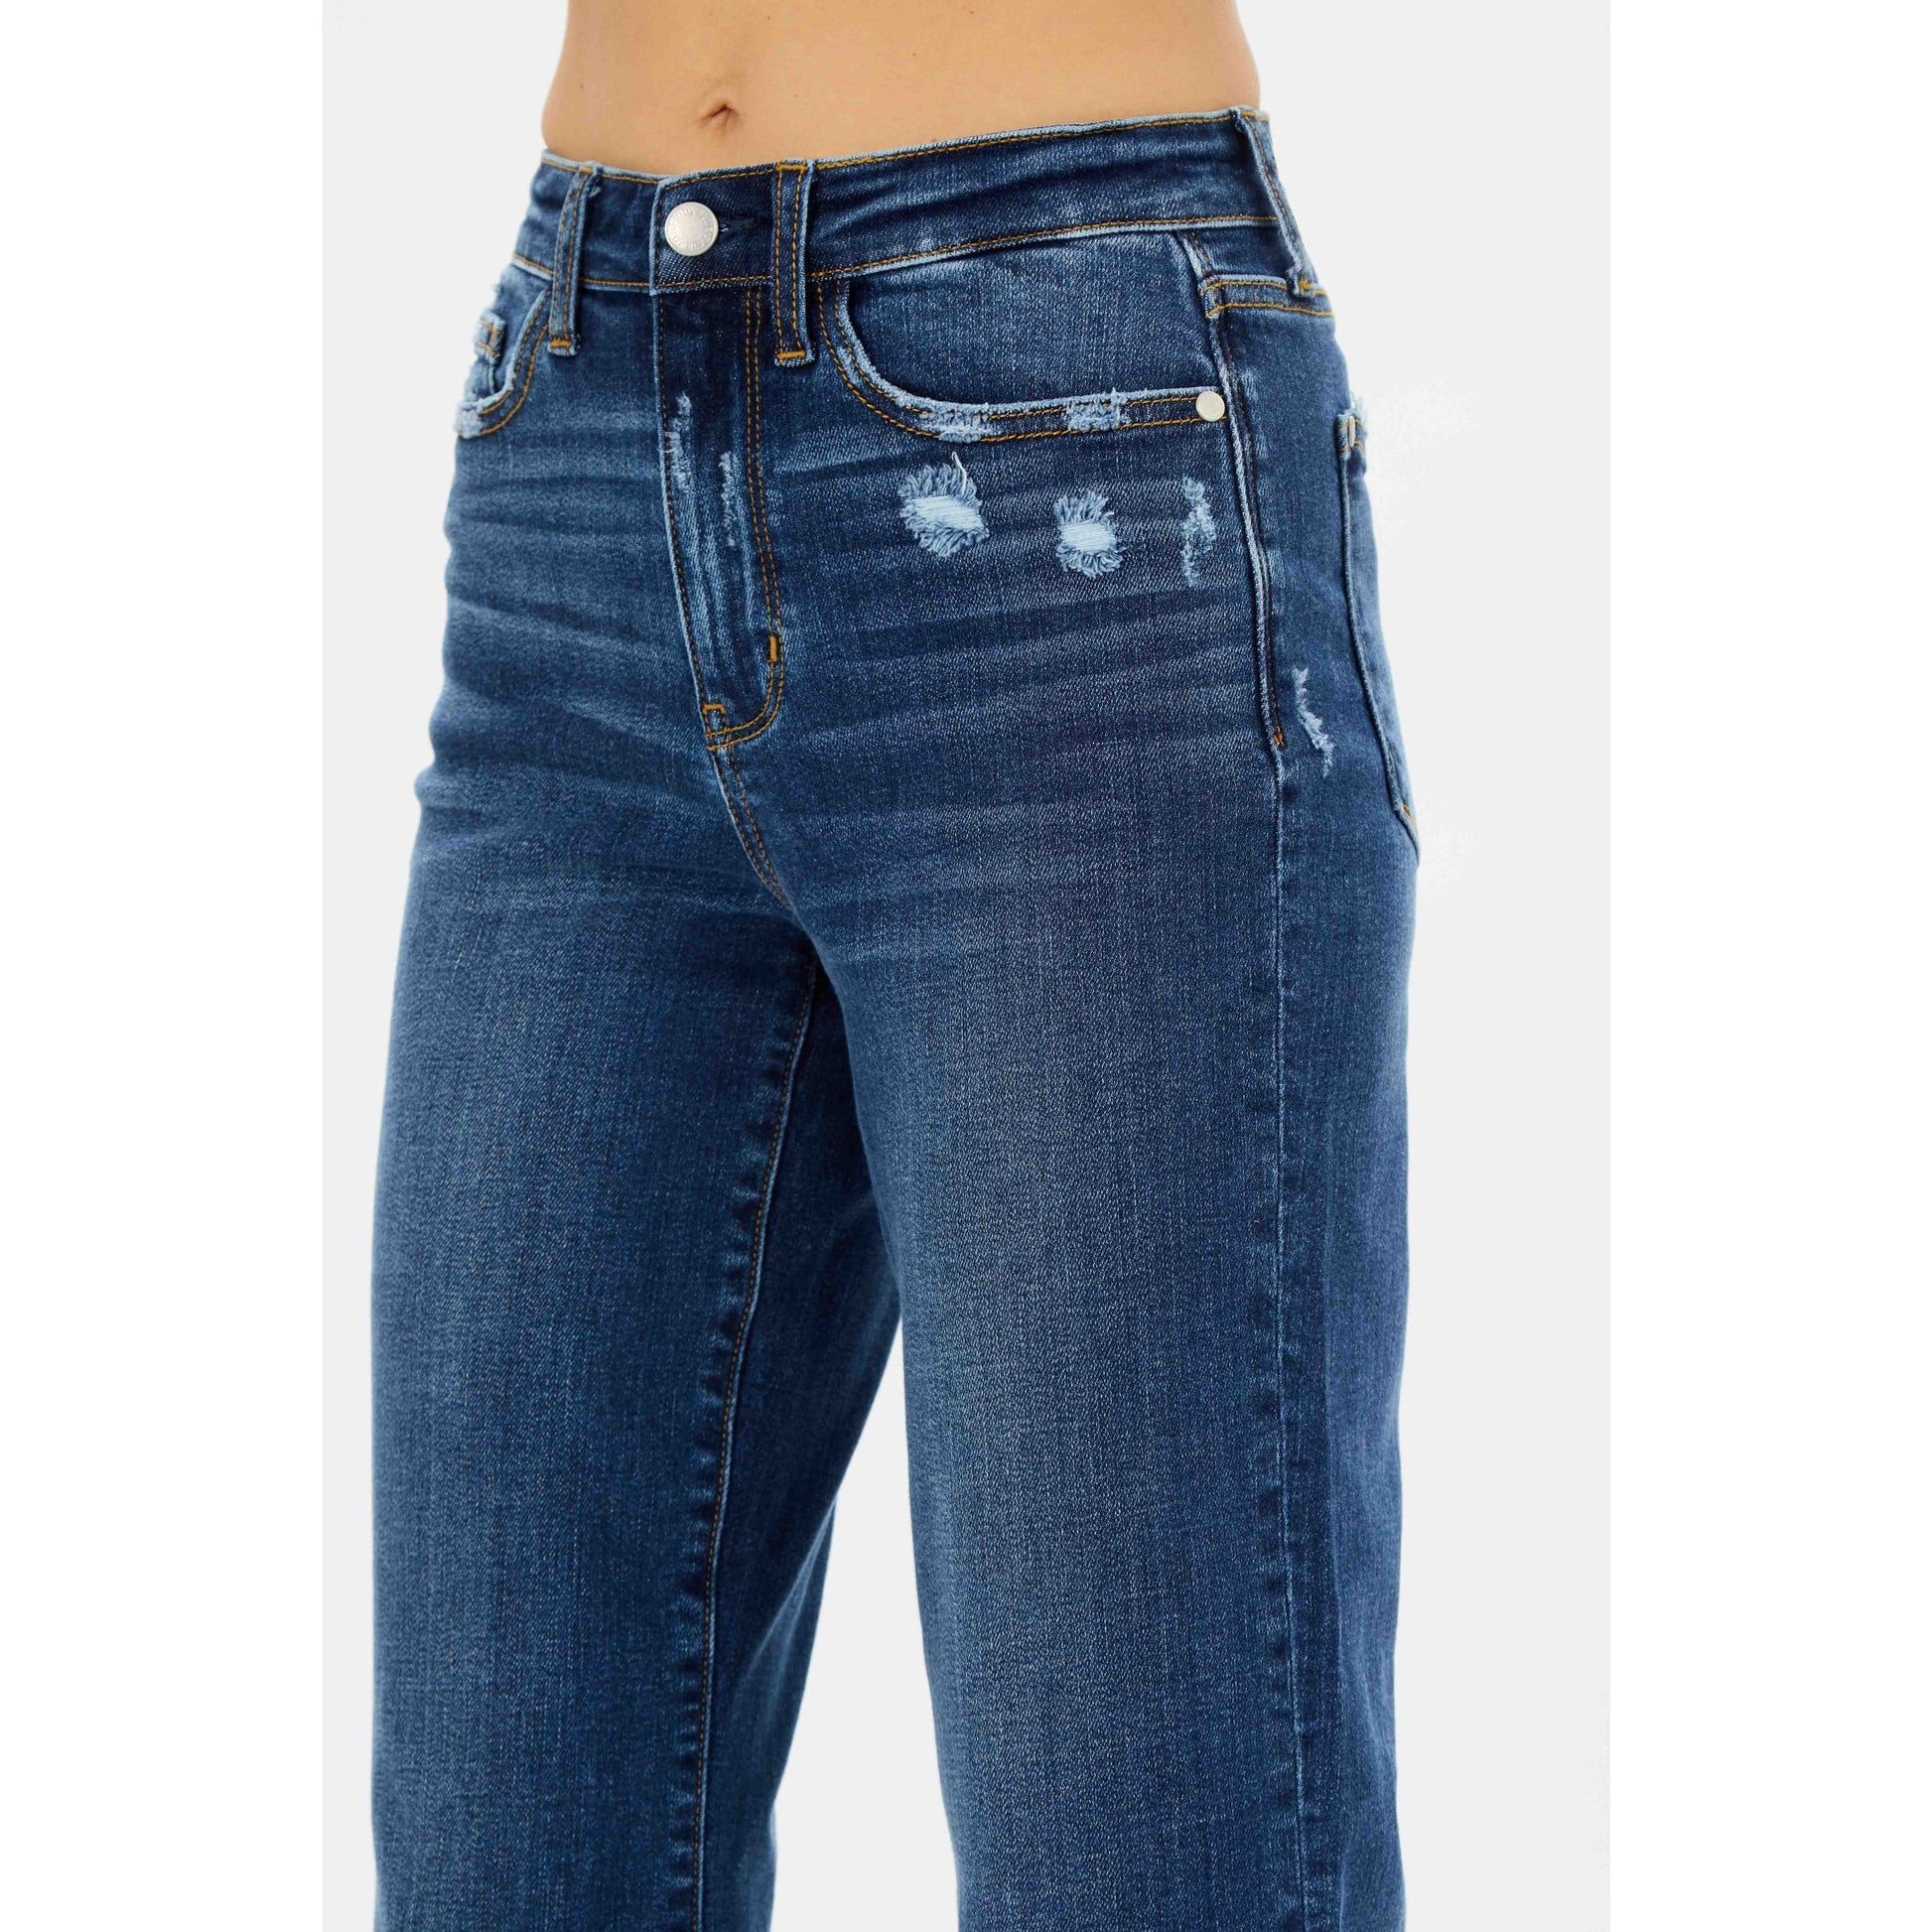 Judy Blue Isla High Waist Destroyed Jeans - Rhapsody and Renascence